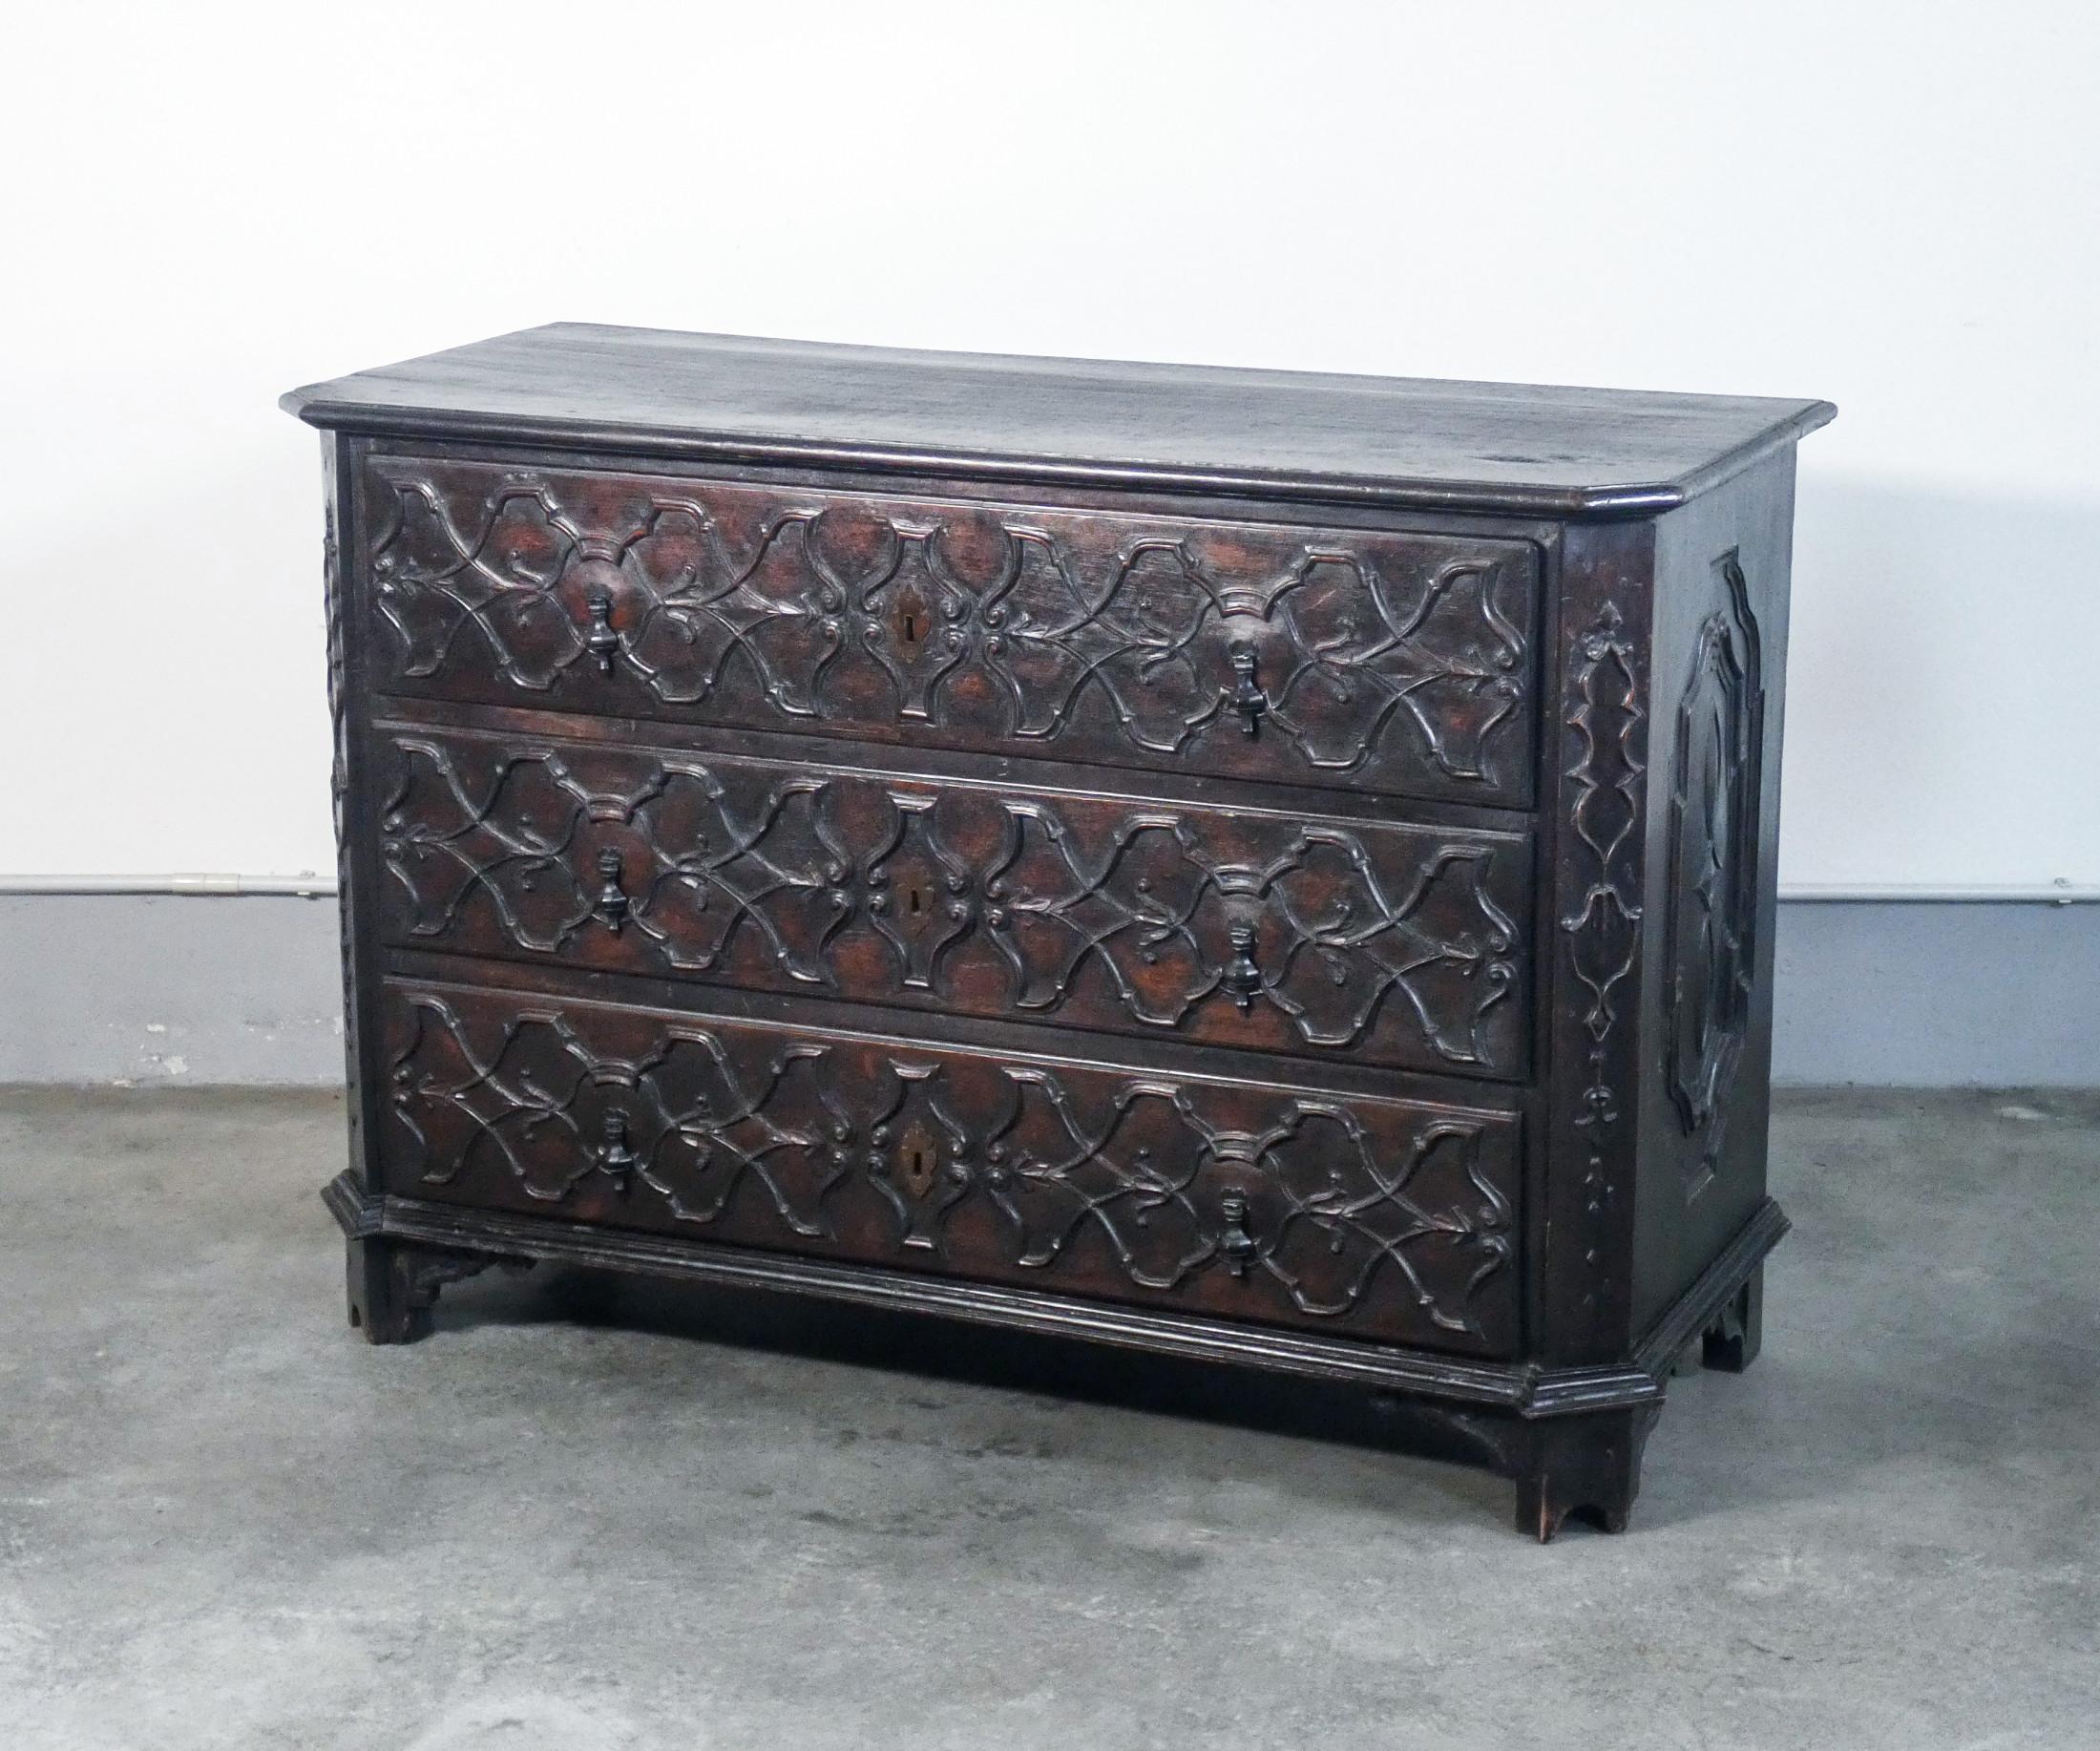 Louis XIV Original Baroque Chest of Drawers in Carved Walnut, Italy, 17th Century